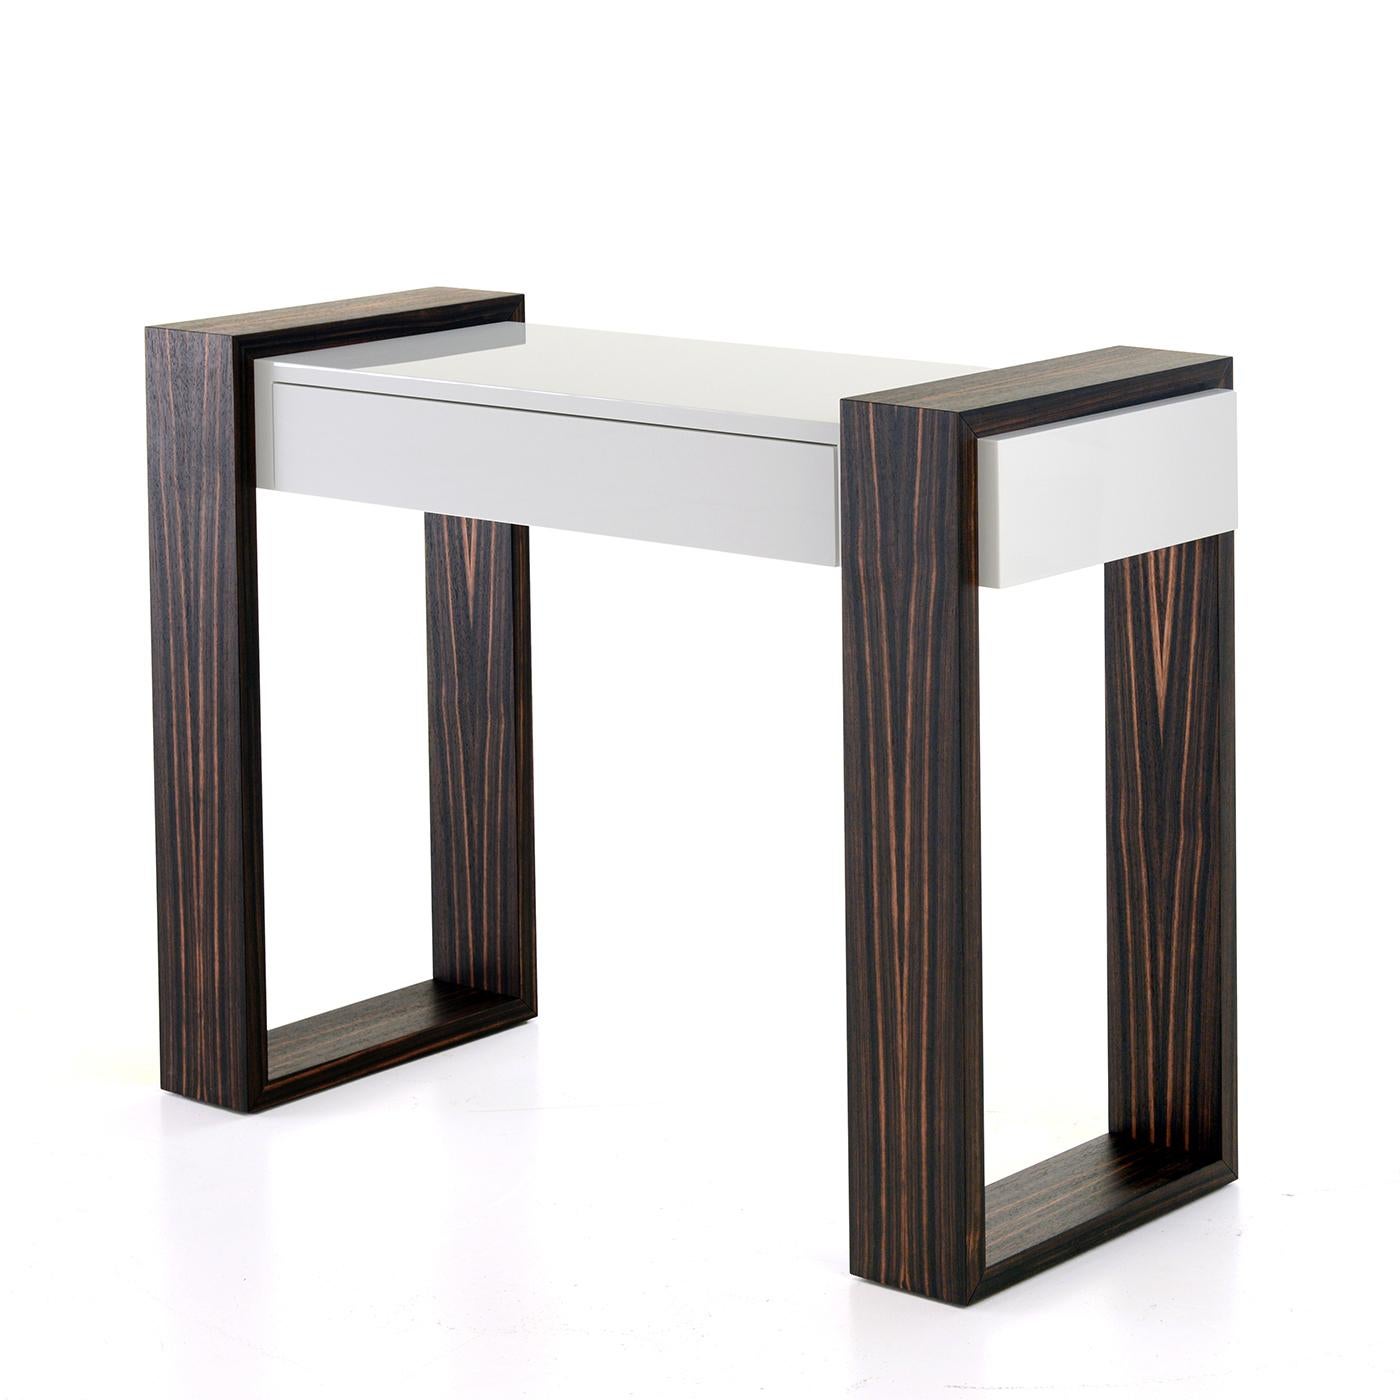 This console represents the whiteness of snow in contrast with the color of ebony wood, one of Africa's most luxurious raw materials, which, when combined together, celebrates the triumph of diversity. This sleek, elegant item also blends modern